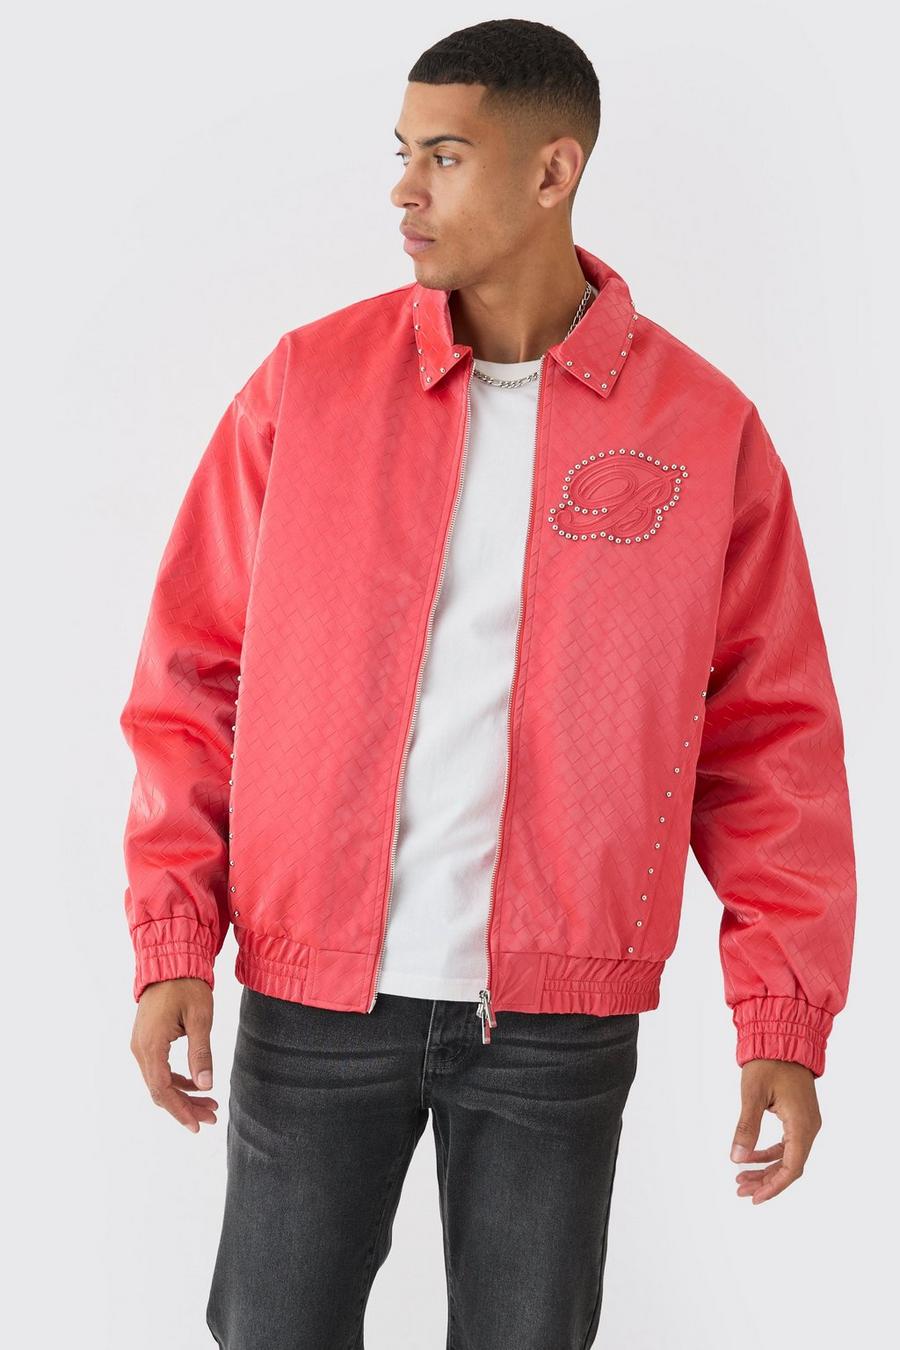 Red Oversized Weave Pu Bomber